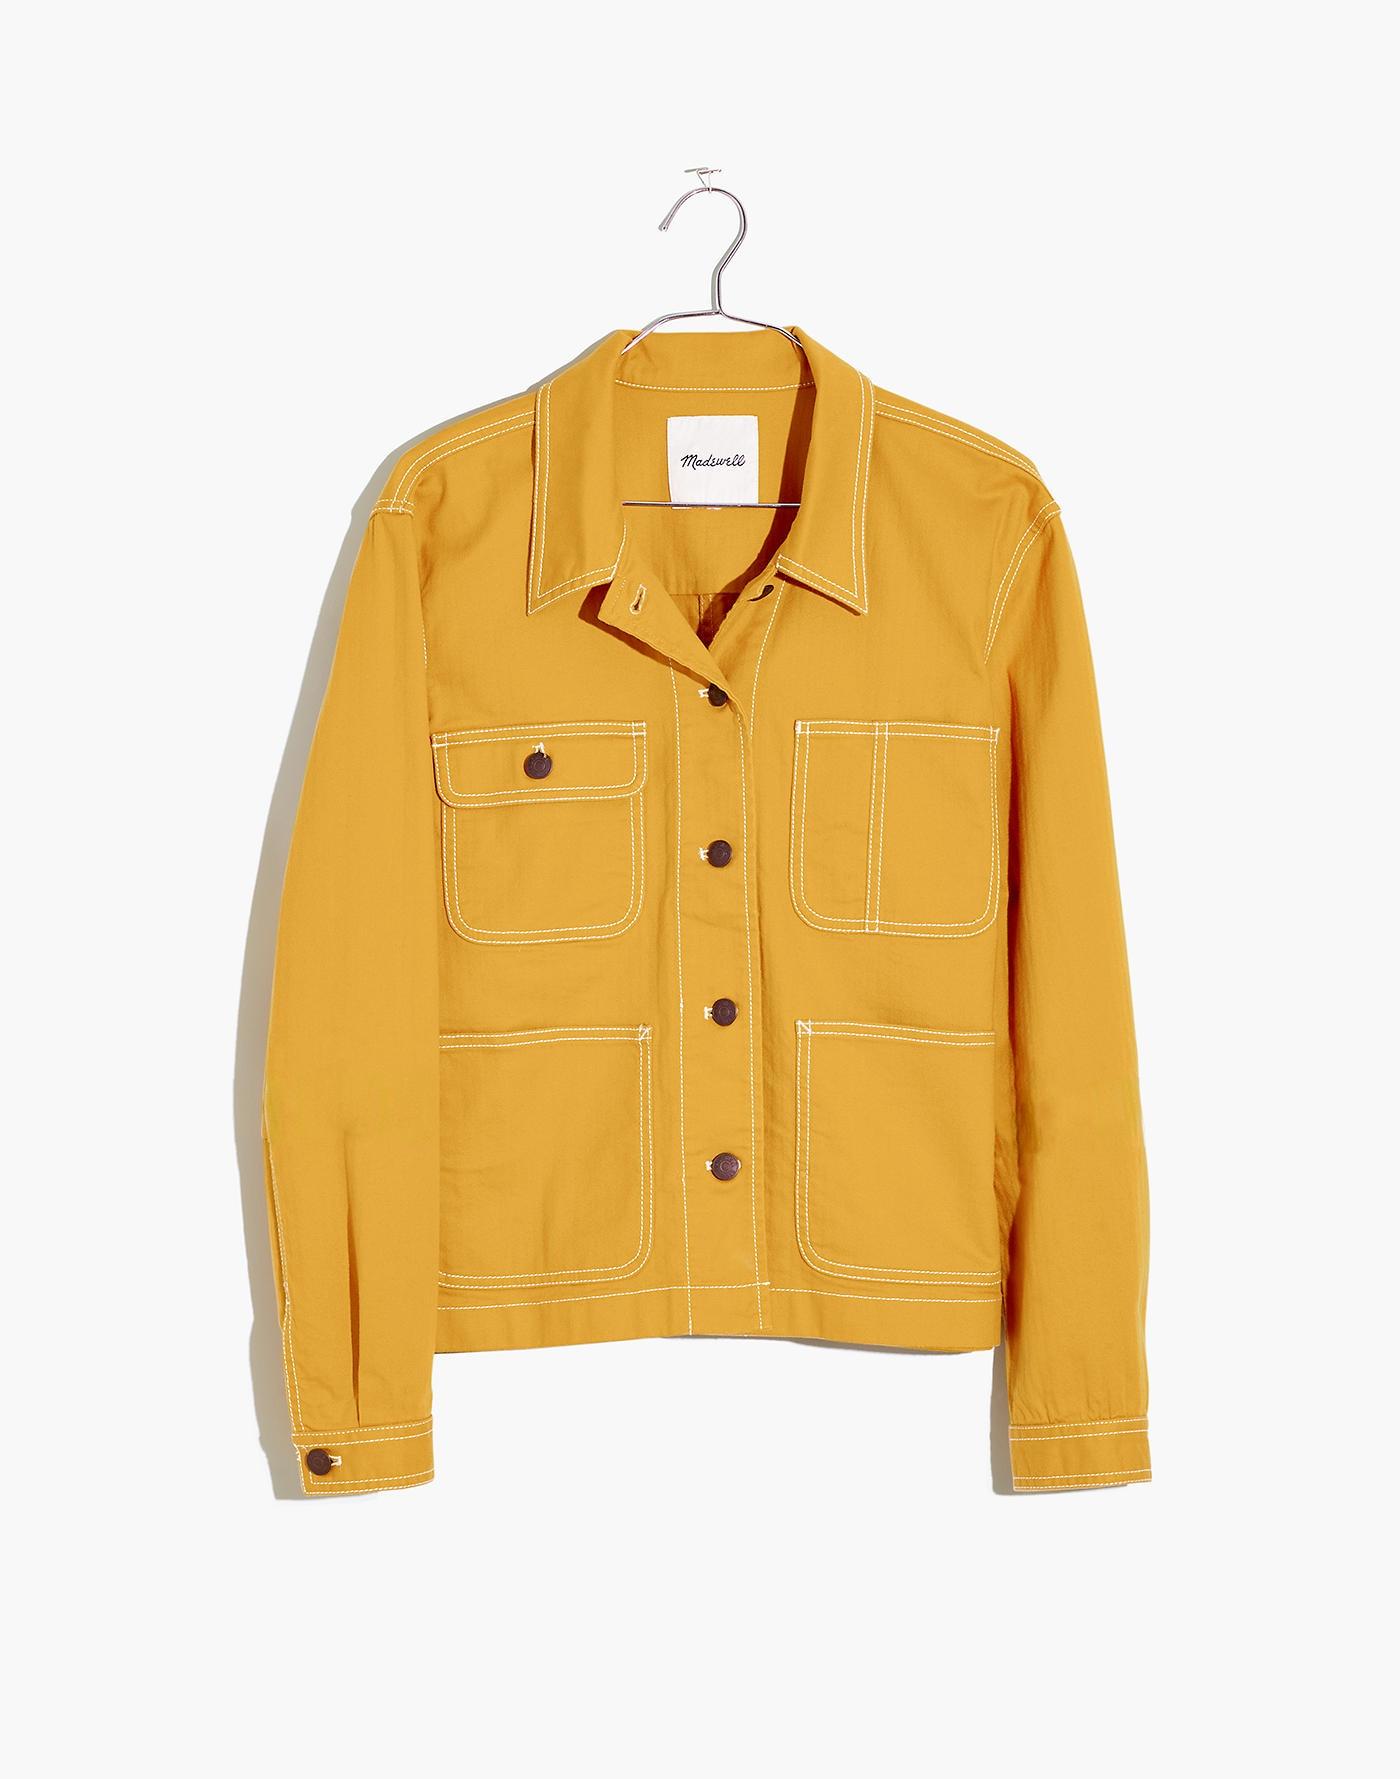 Madewell Cotton Crop Chore Jacket in Yellow - Lyst